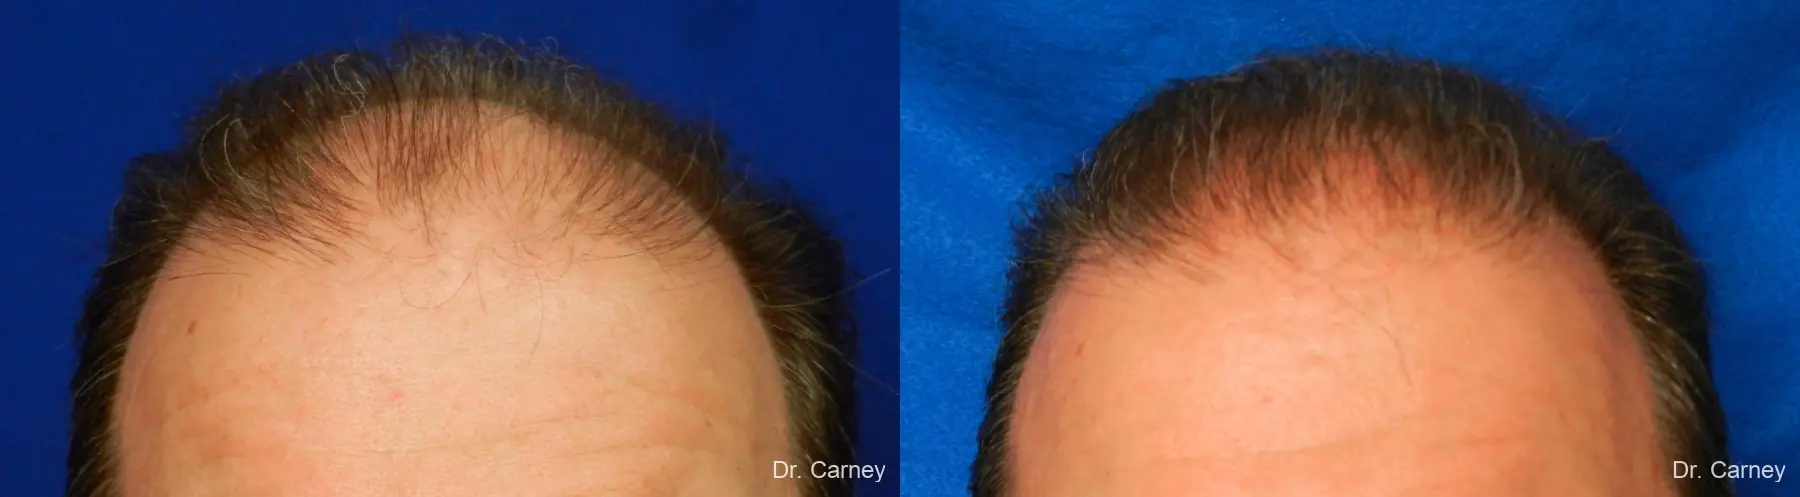 Hair Transplantation: Patient 16 - Before and After 1